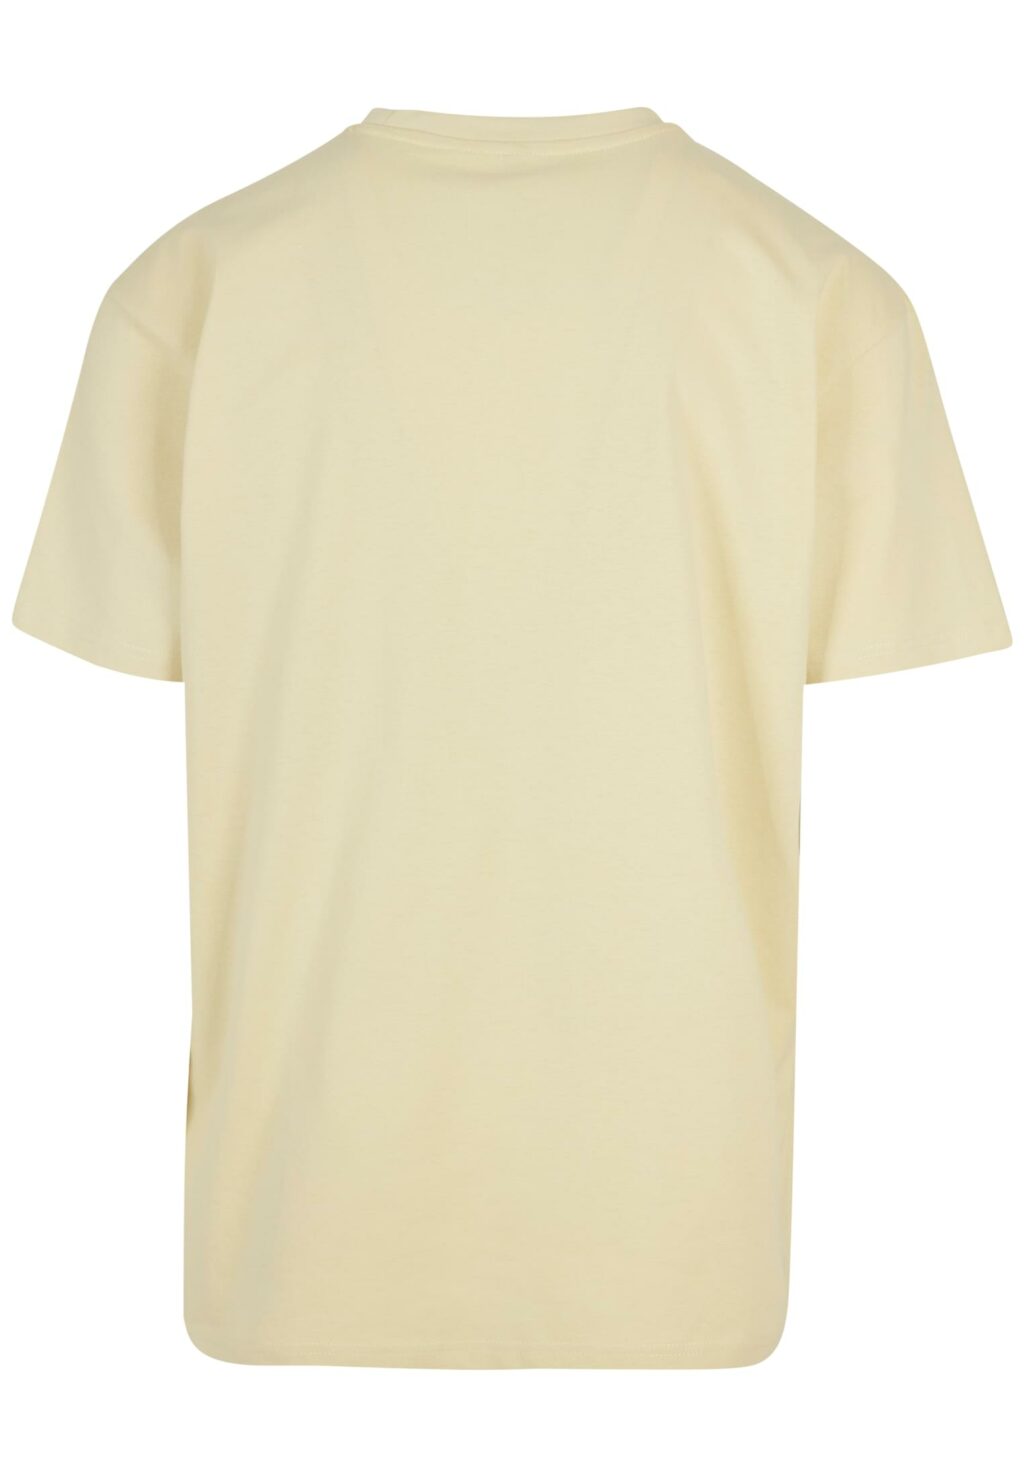 Days Before Summer Oversize Tee soft yellow MT1840